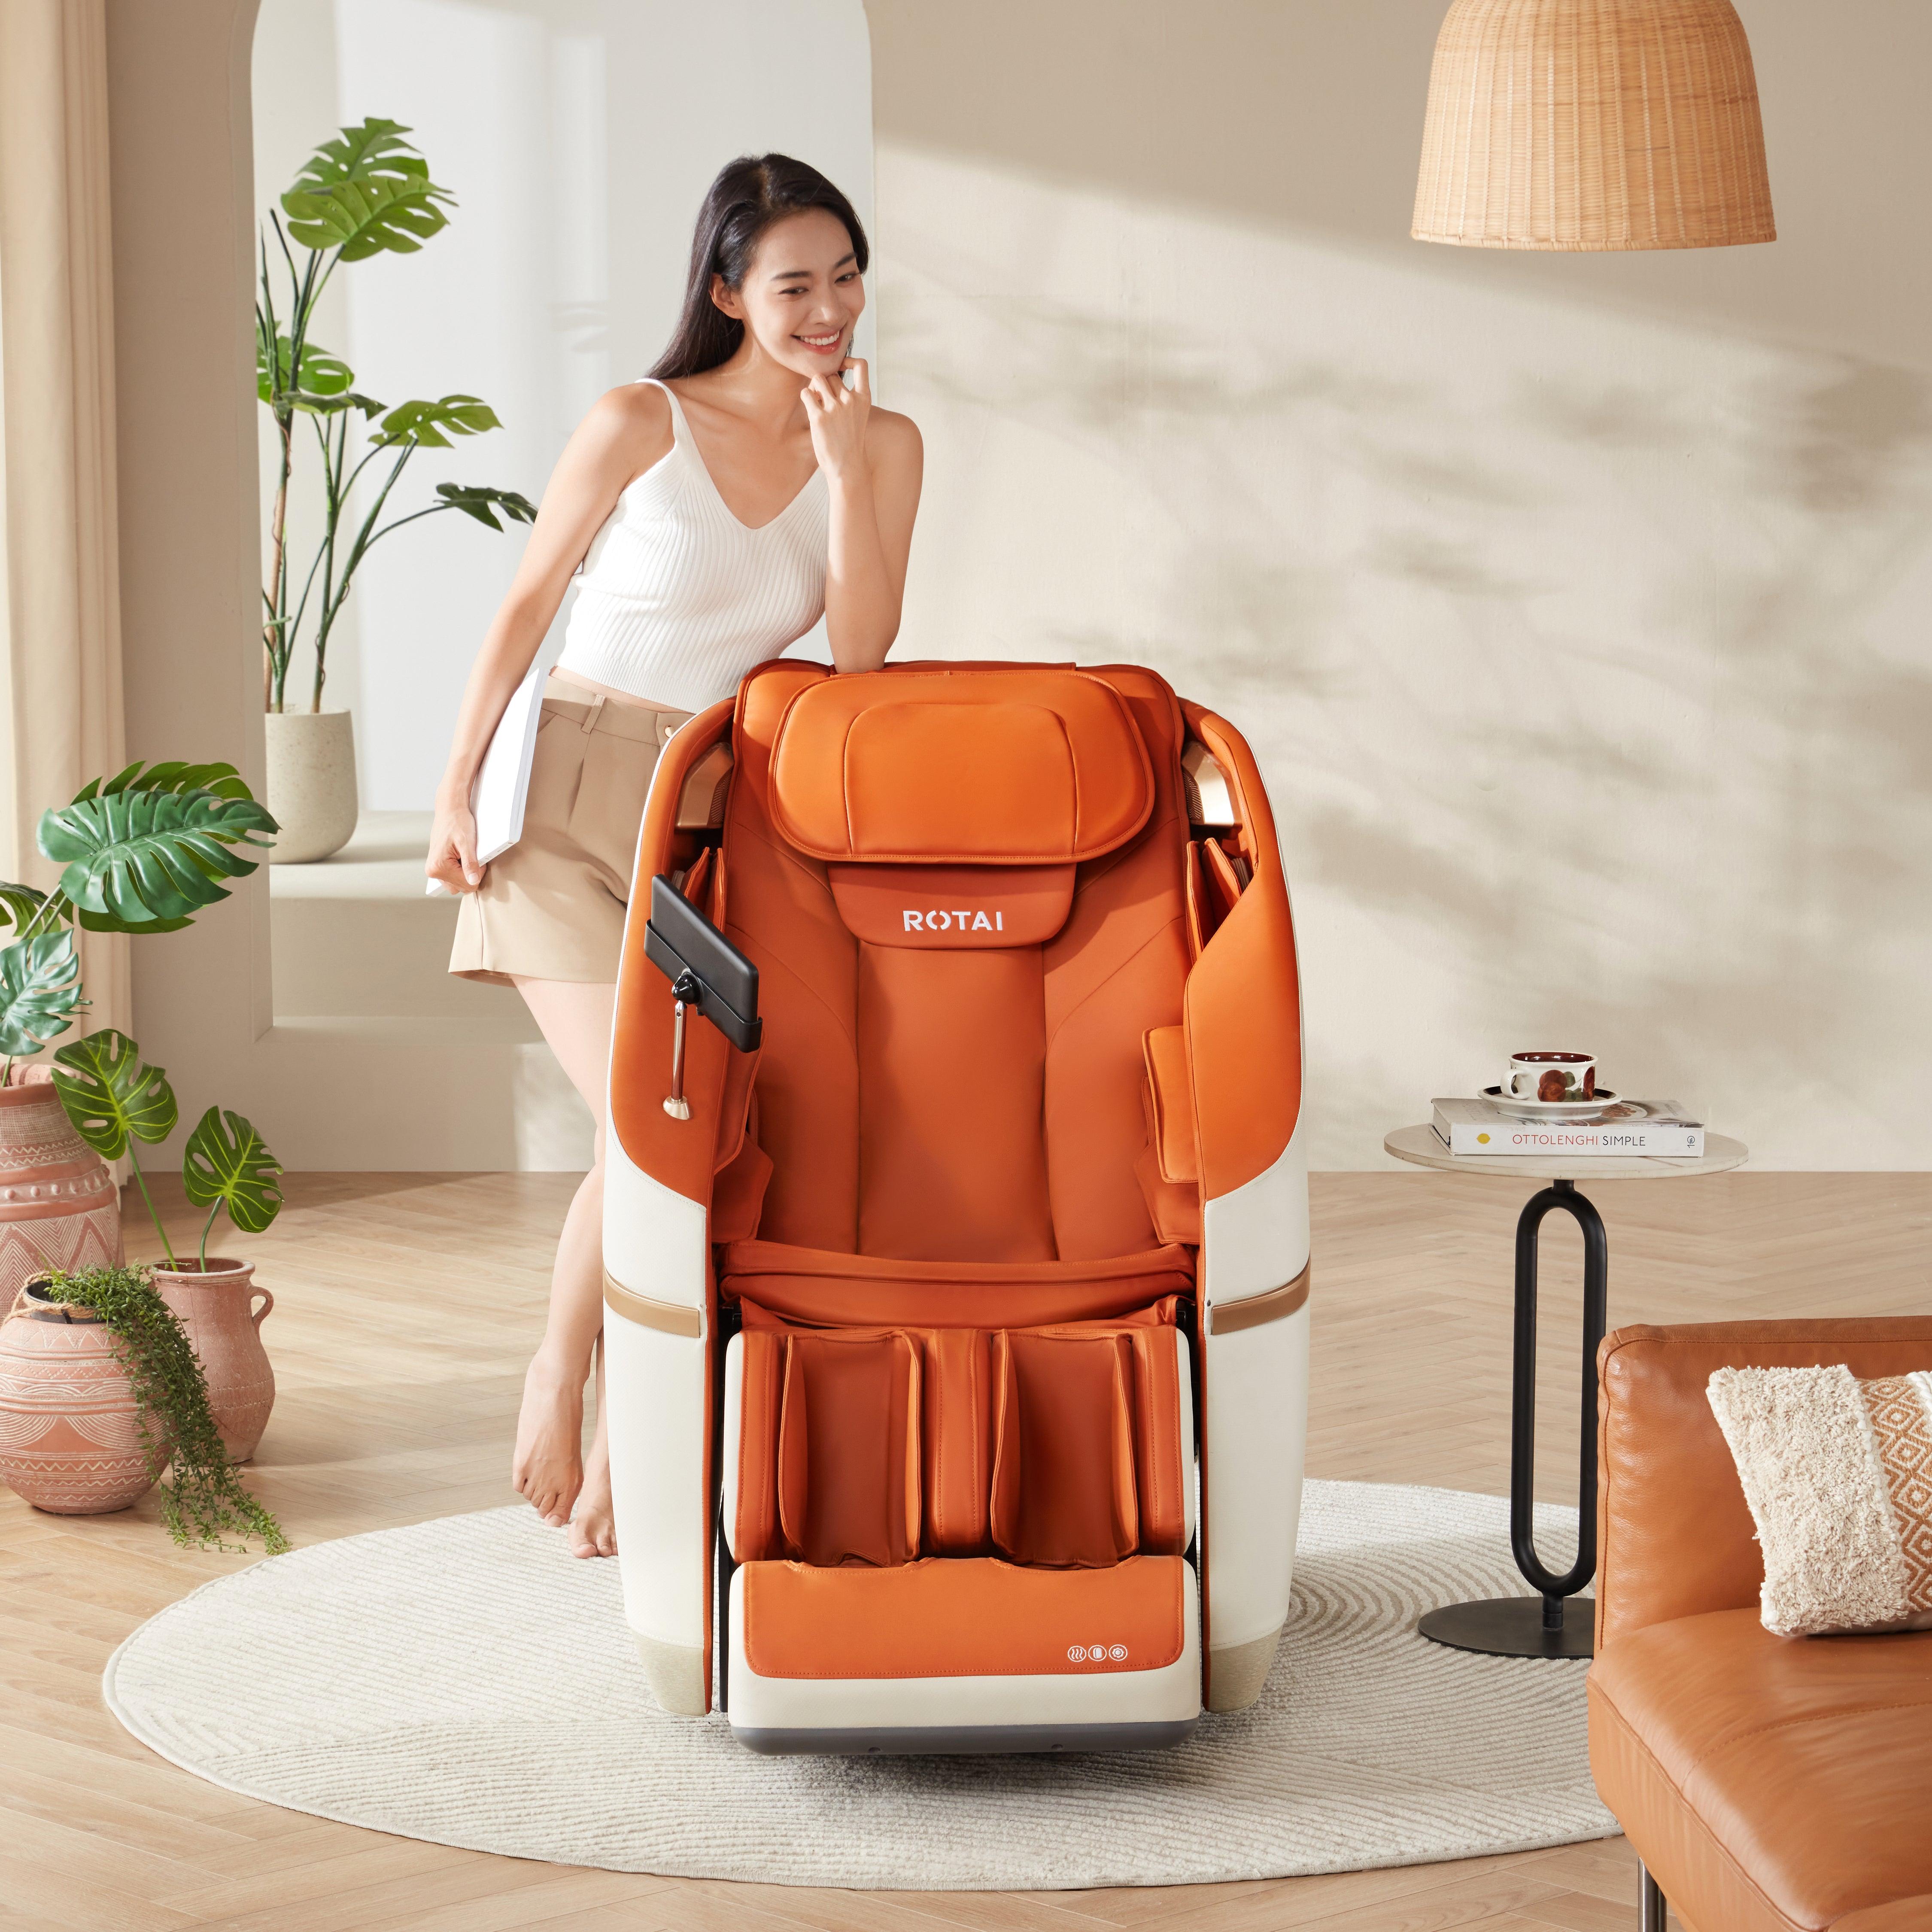 Woman standing next to orange Jimny massage chair with 10-year warranty, available at massage chair shop in Dubai, UAE.